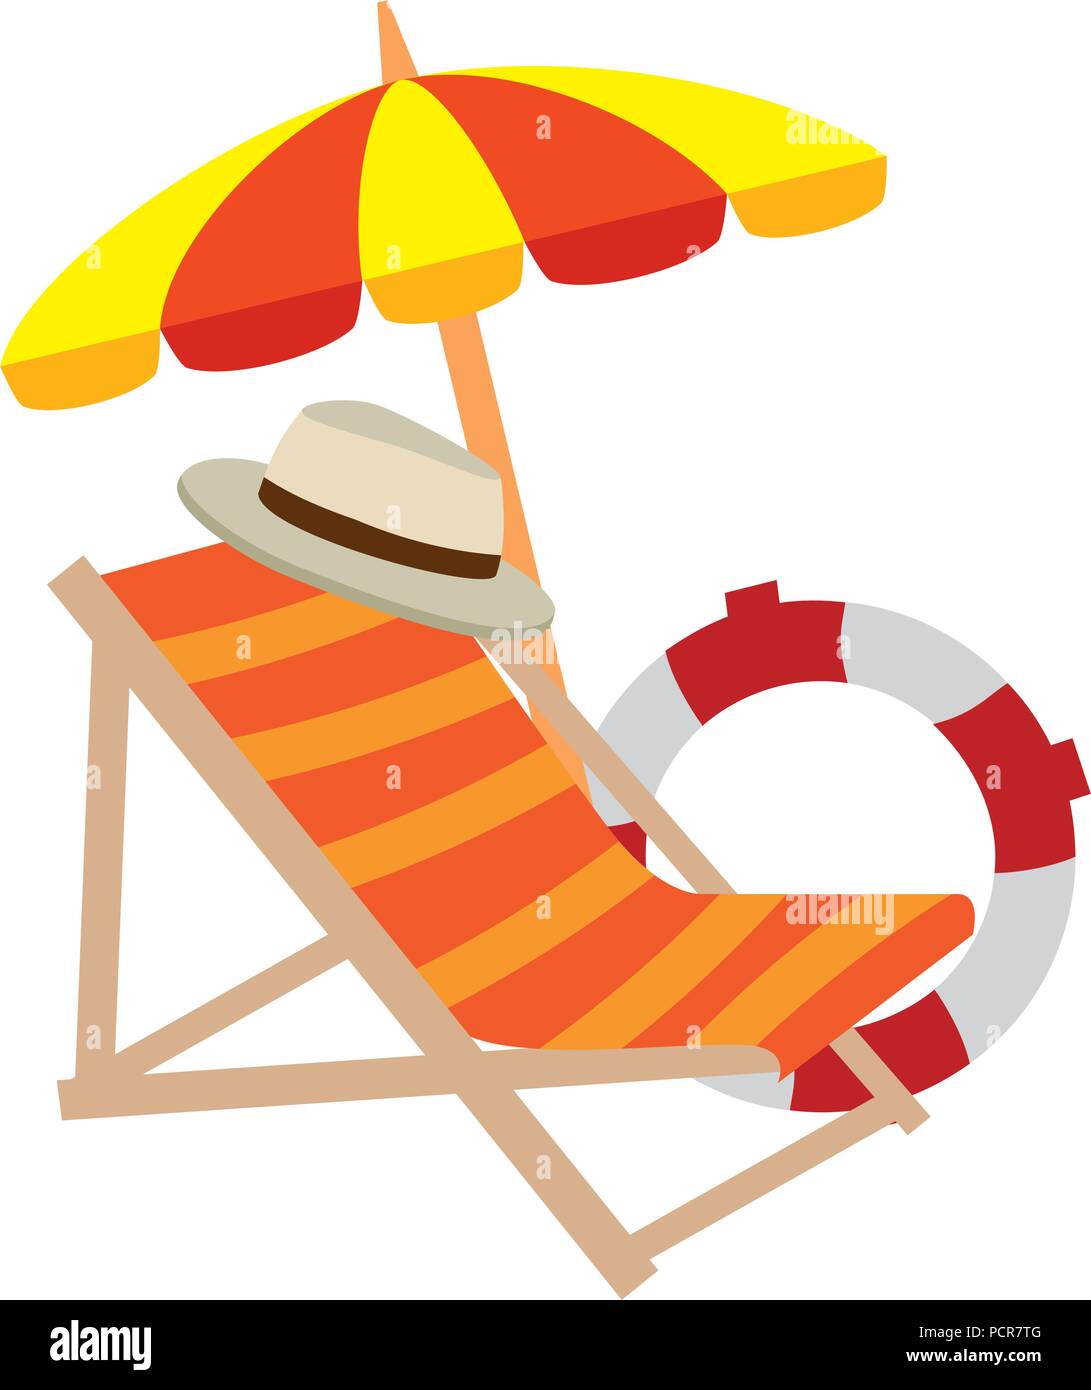 beach chair with umbrella and float Stock Vector